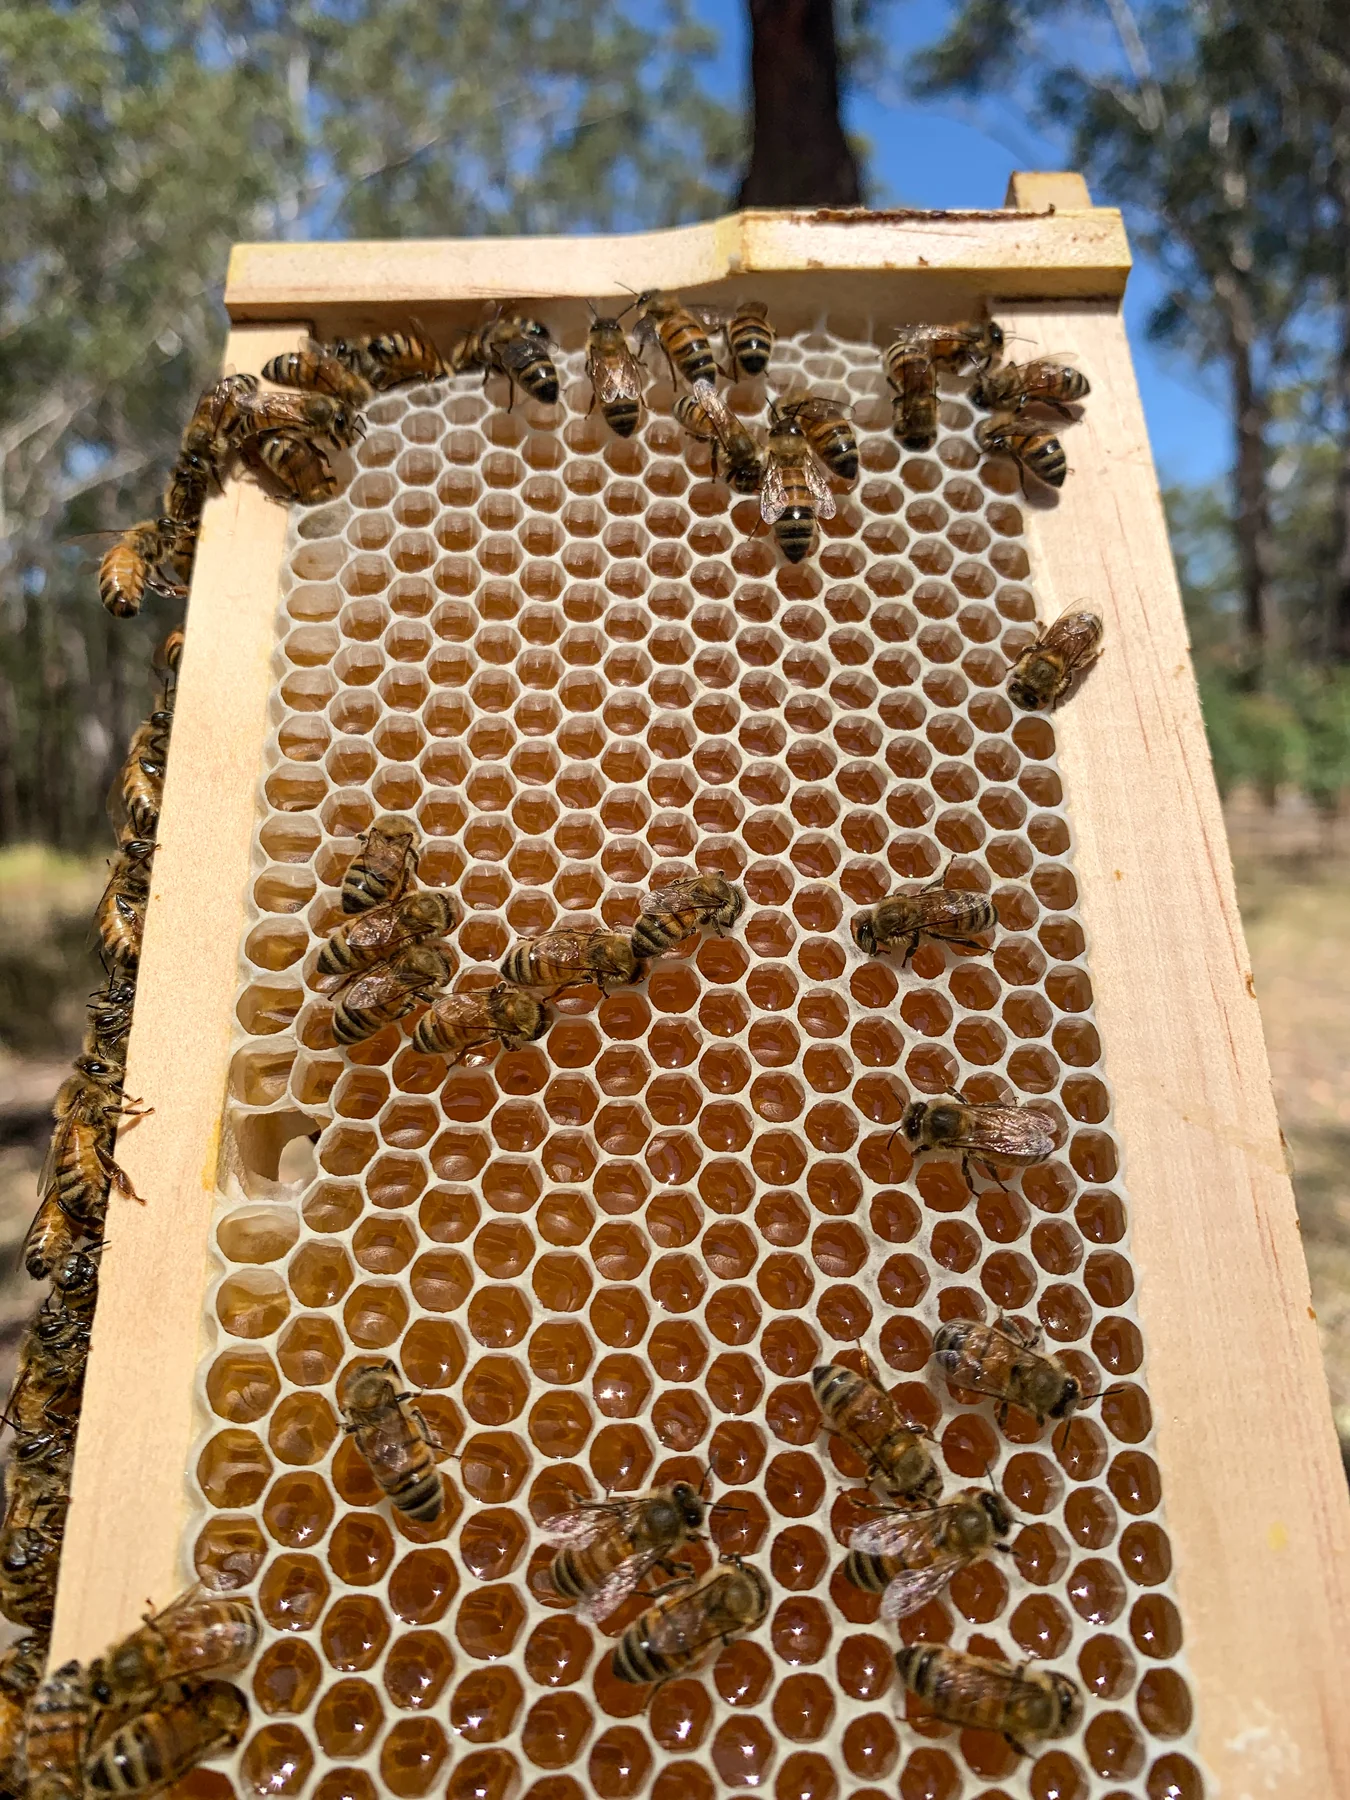 Malfroy's Gold Uncapped Wild Honeycomb